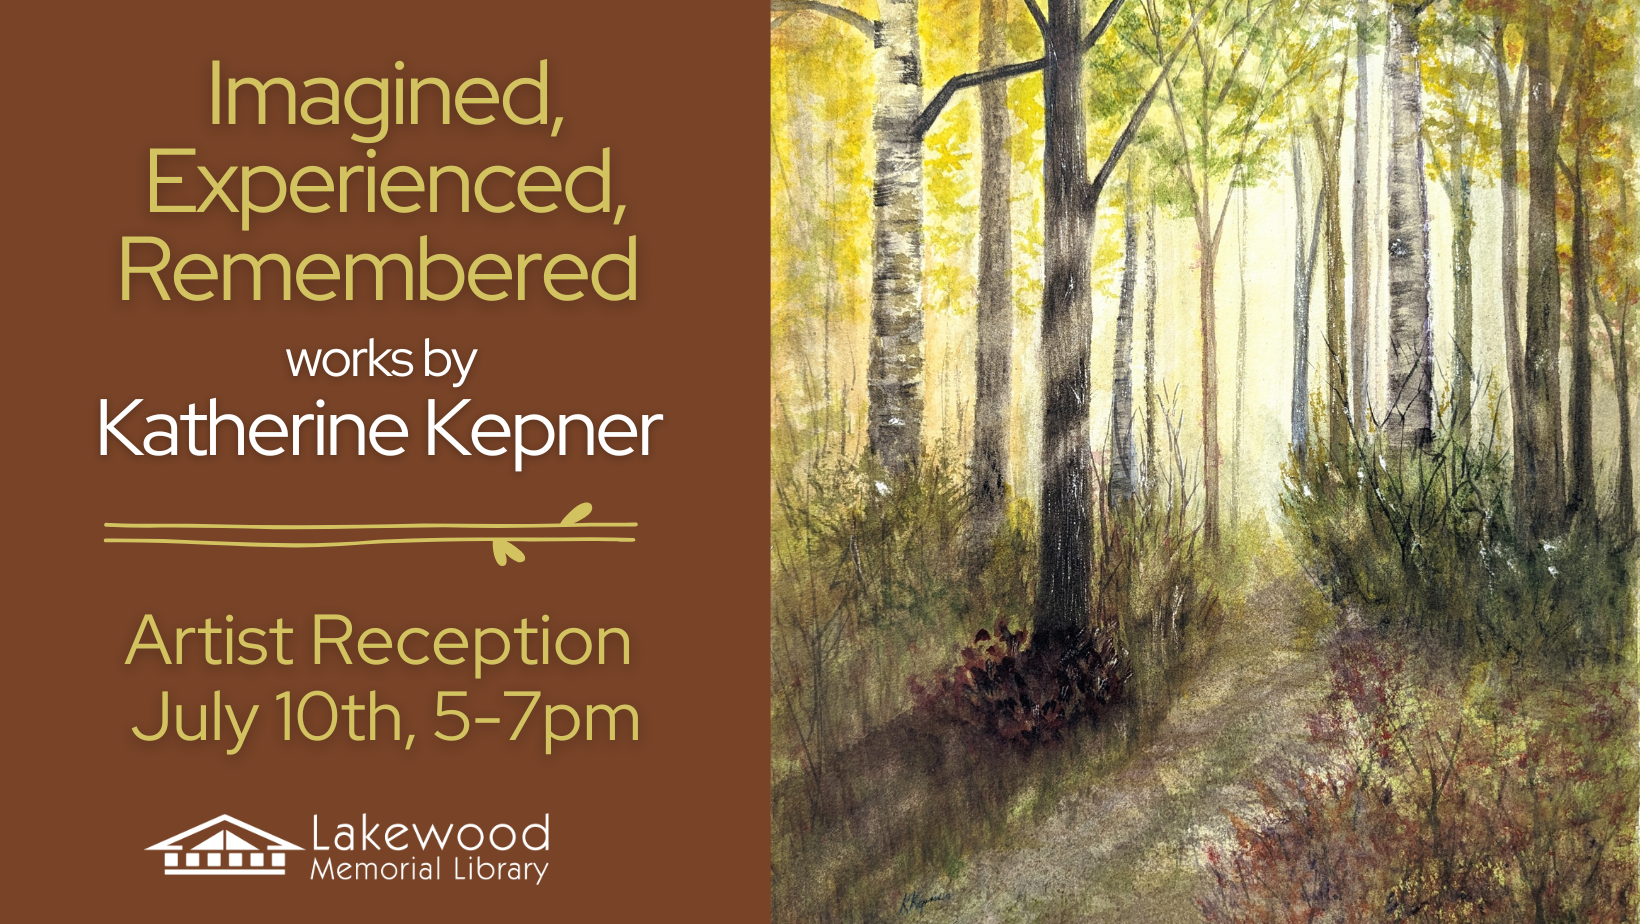 New Exhibit: Imagined, Experienced, Remembered